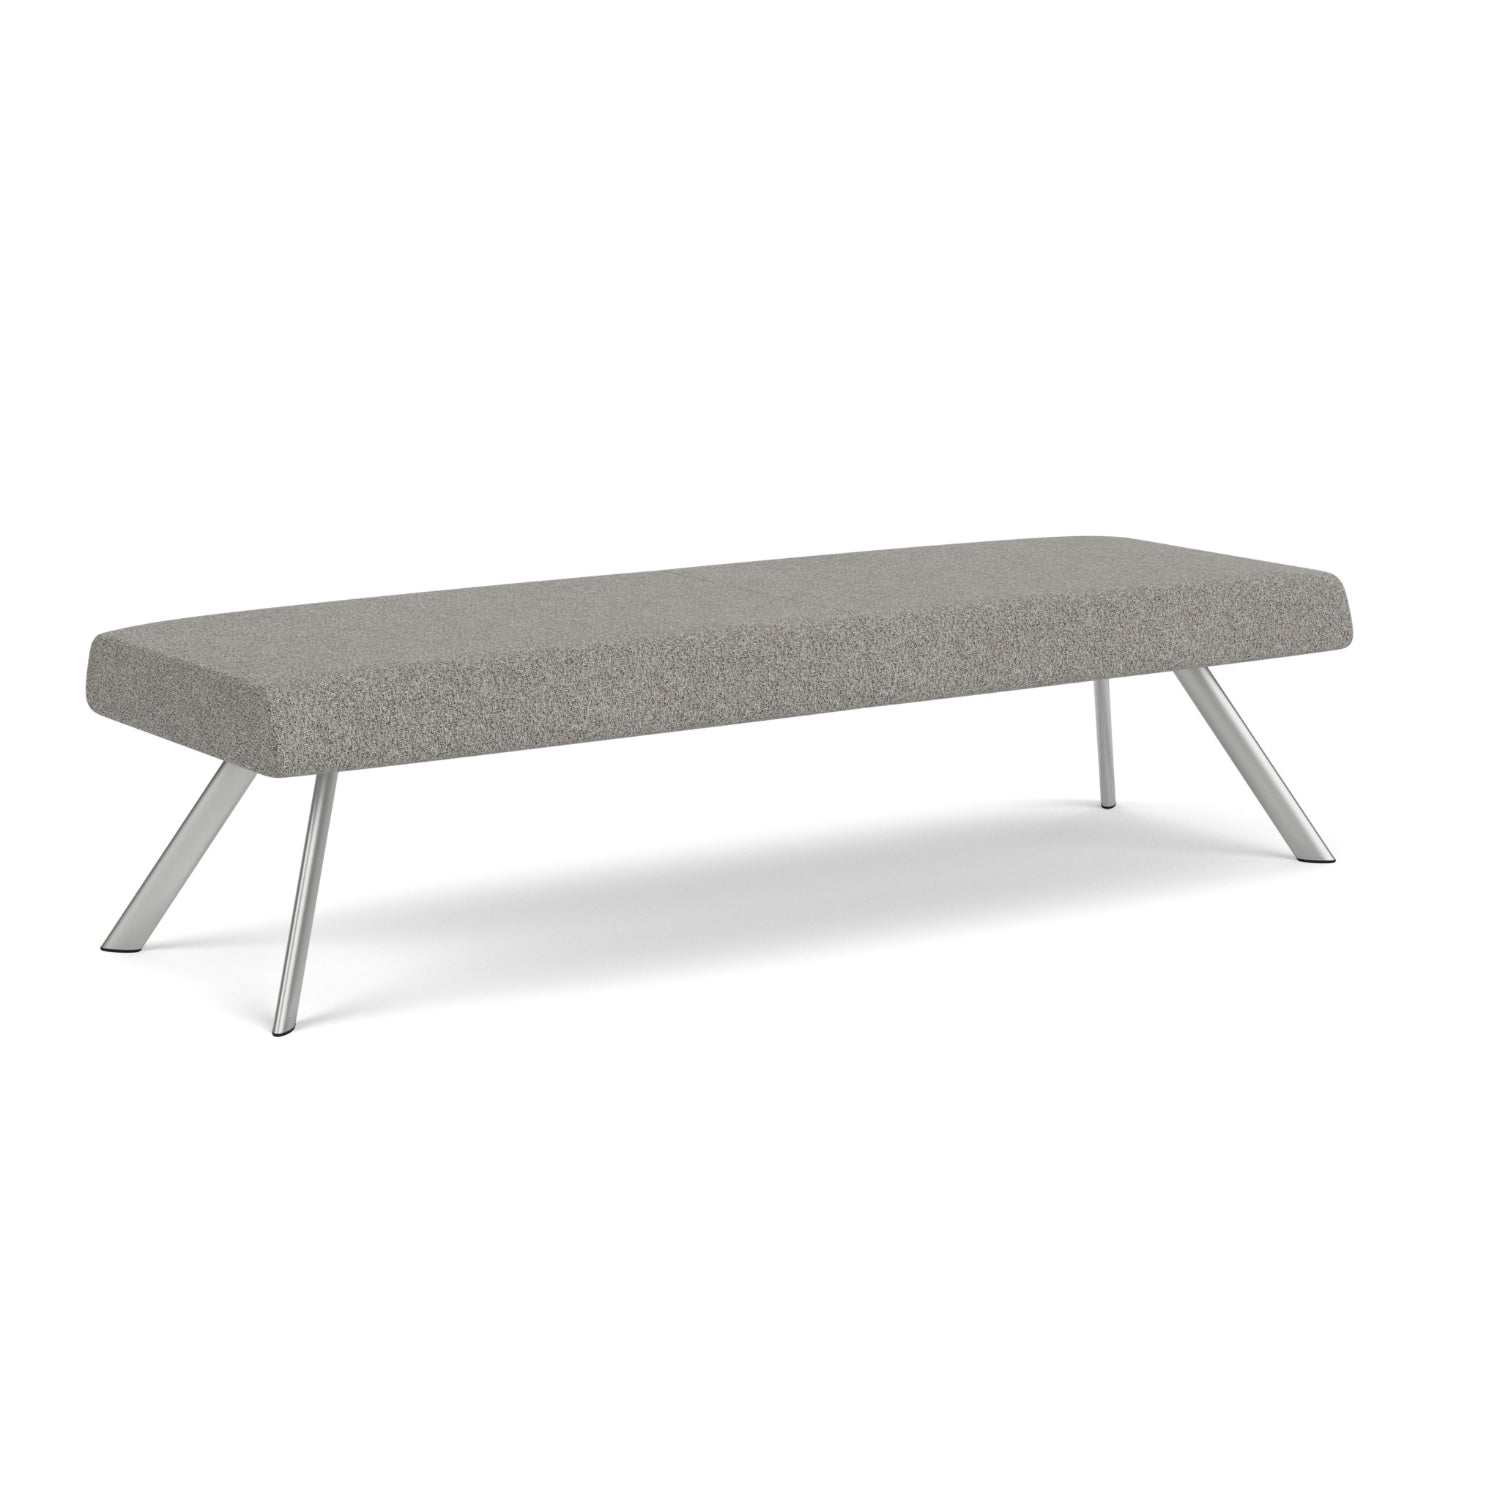 Willow Collection Reception Seating, 3 Seat Bench, Standard Fabric Upholstery, FREE SHIPPING